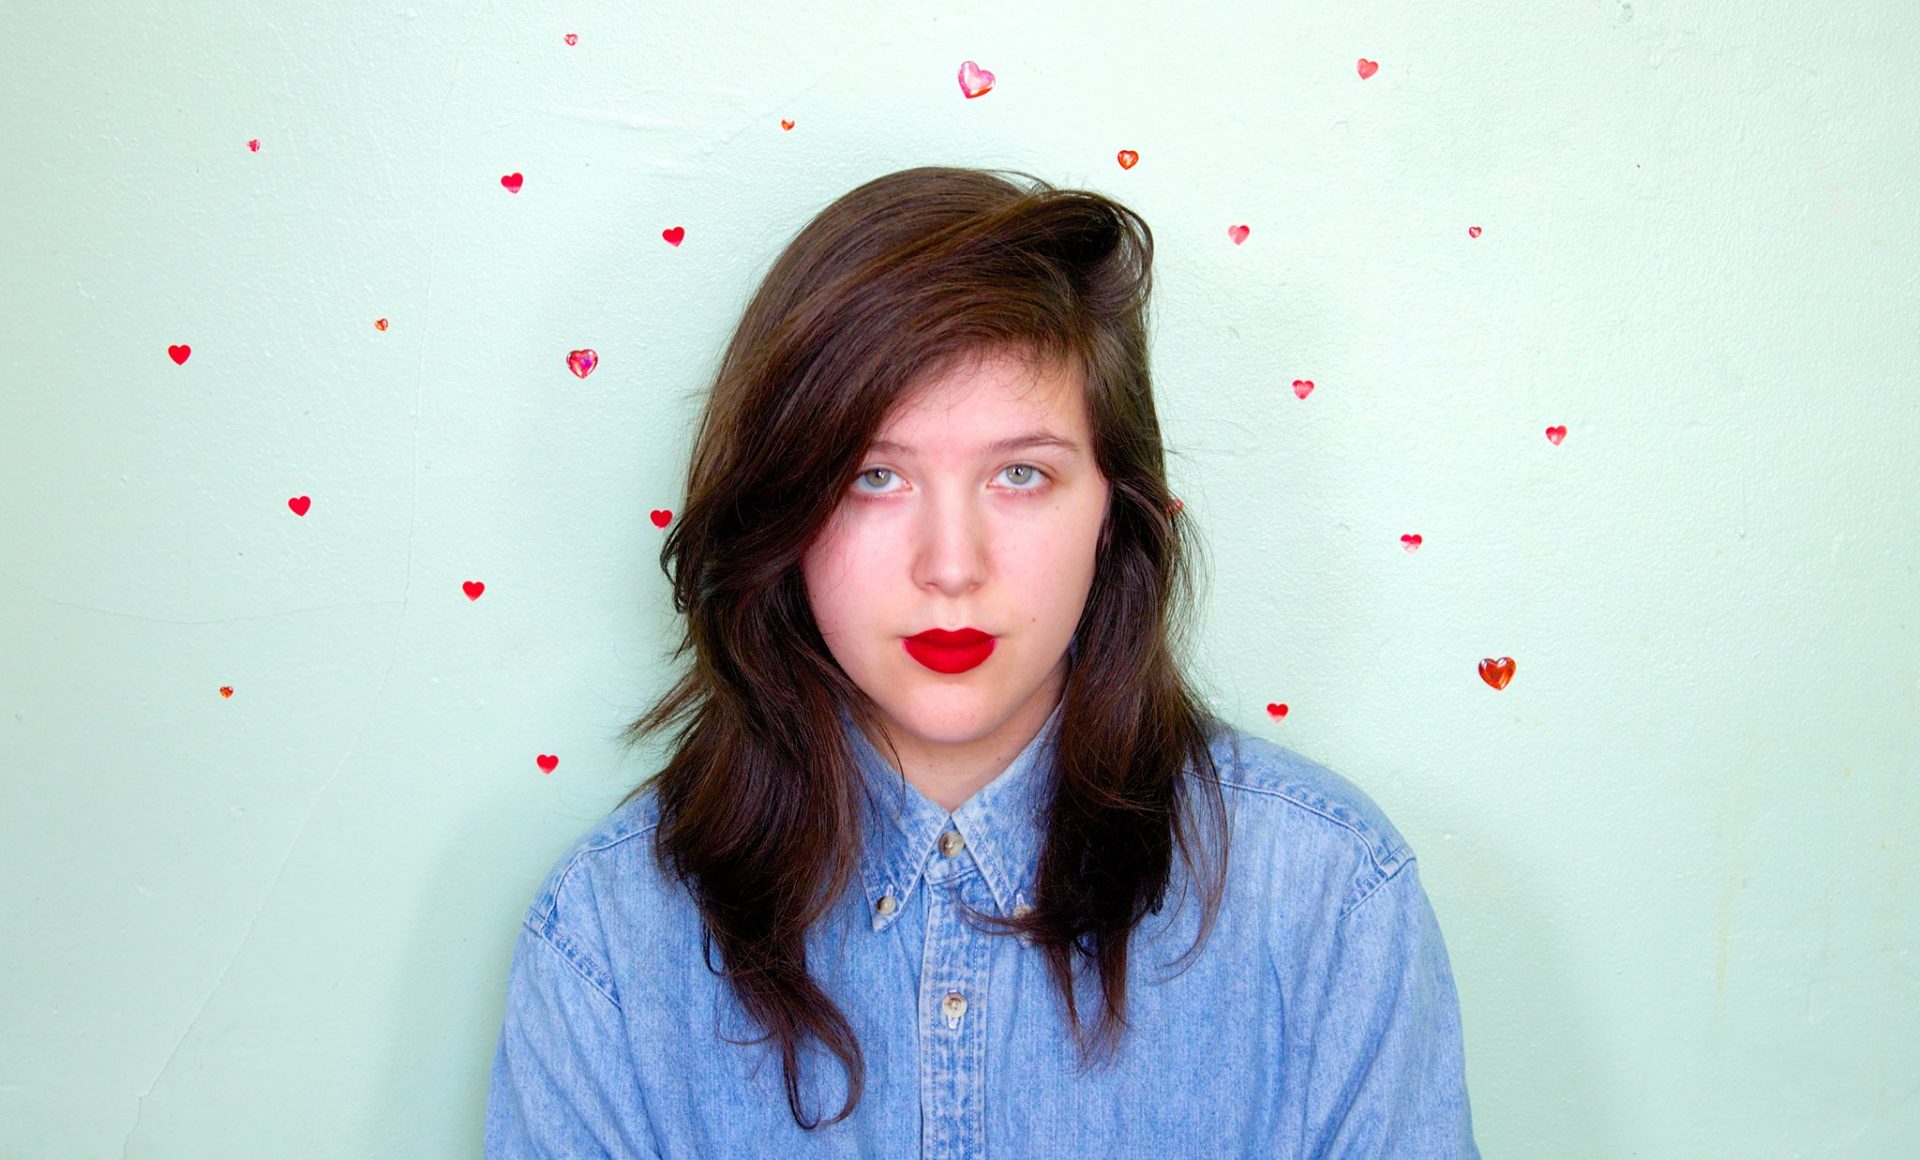 Lucy Dacus album release show with Rikki Shay at The Broadberry Friday